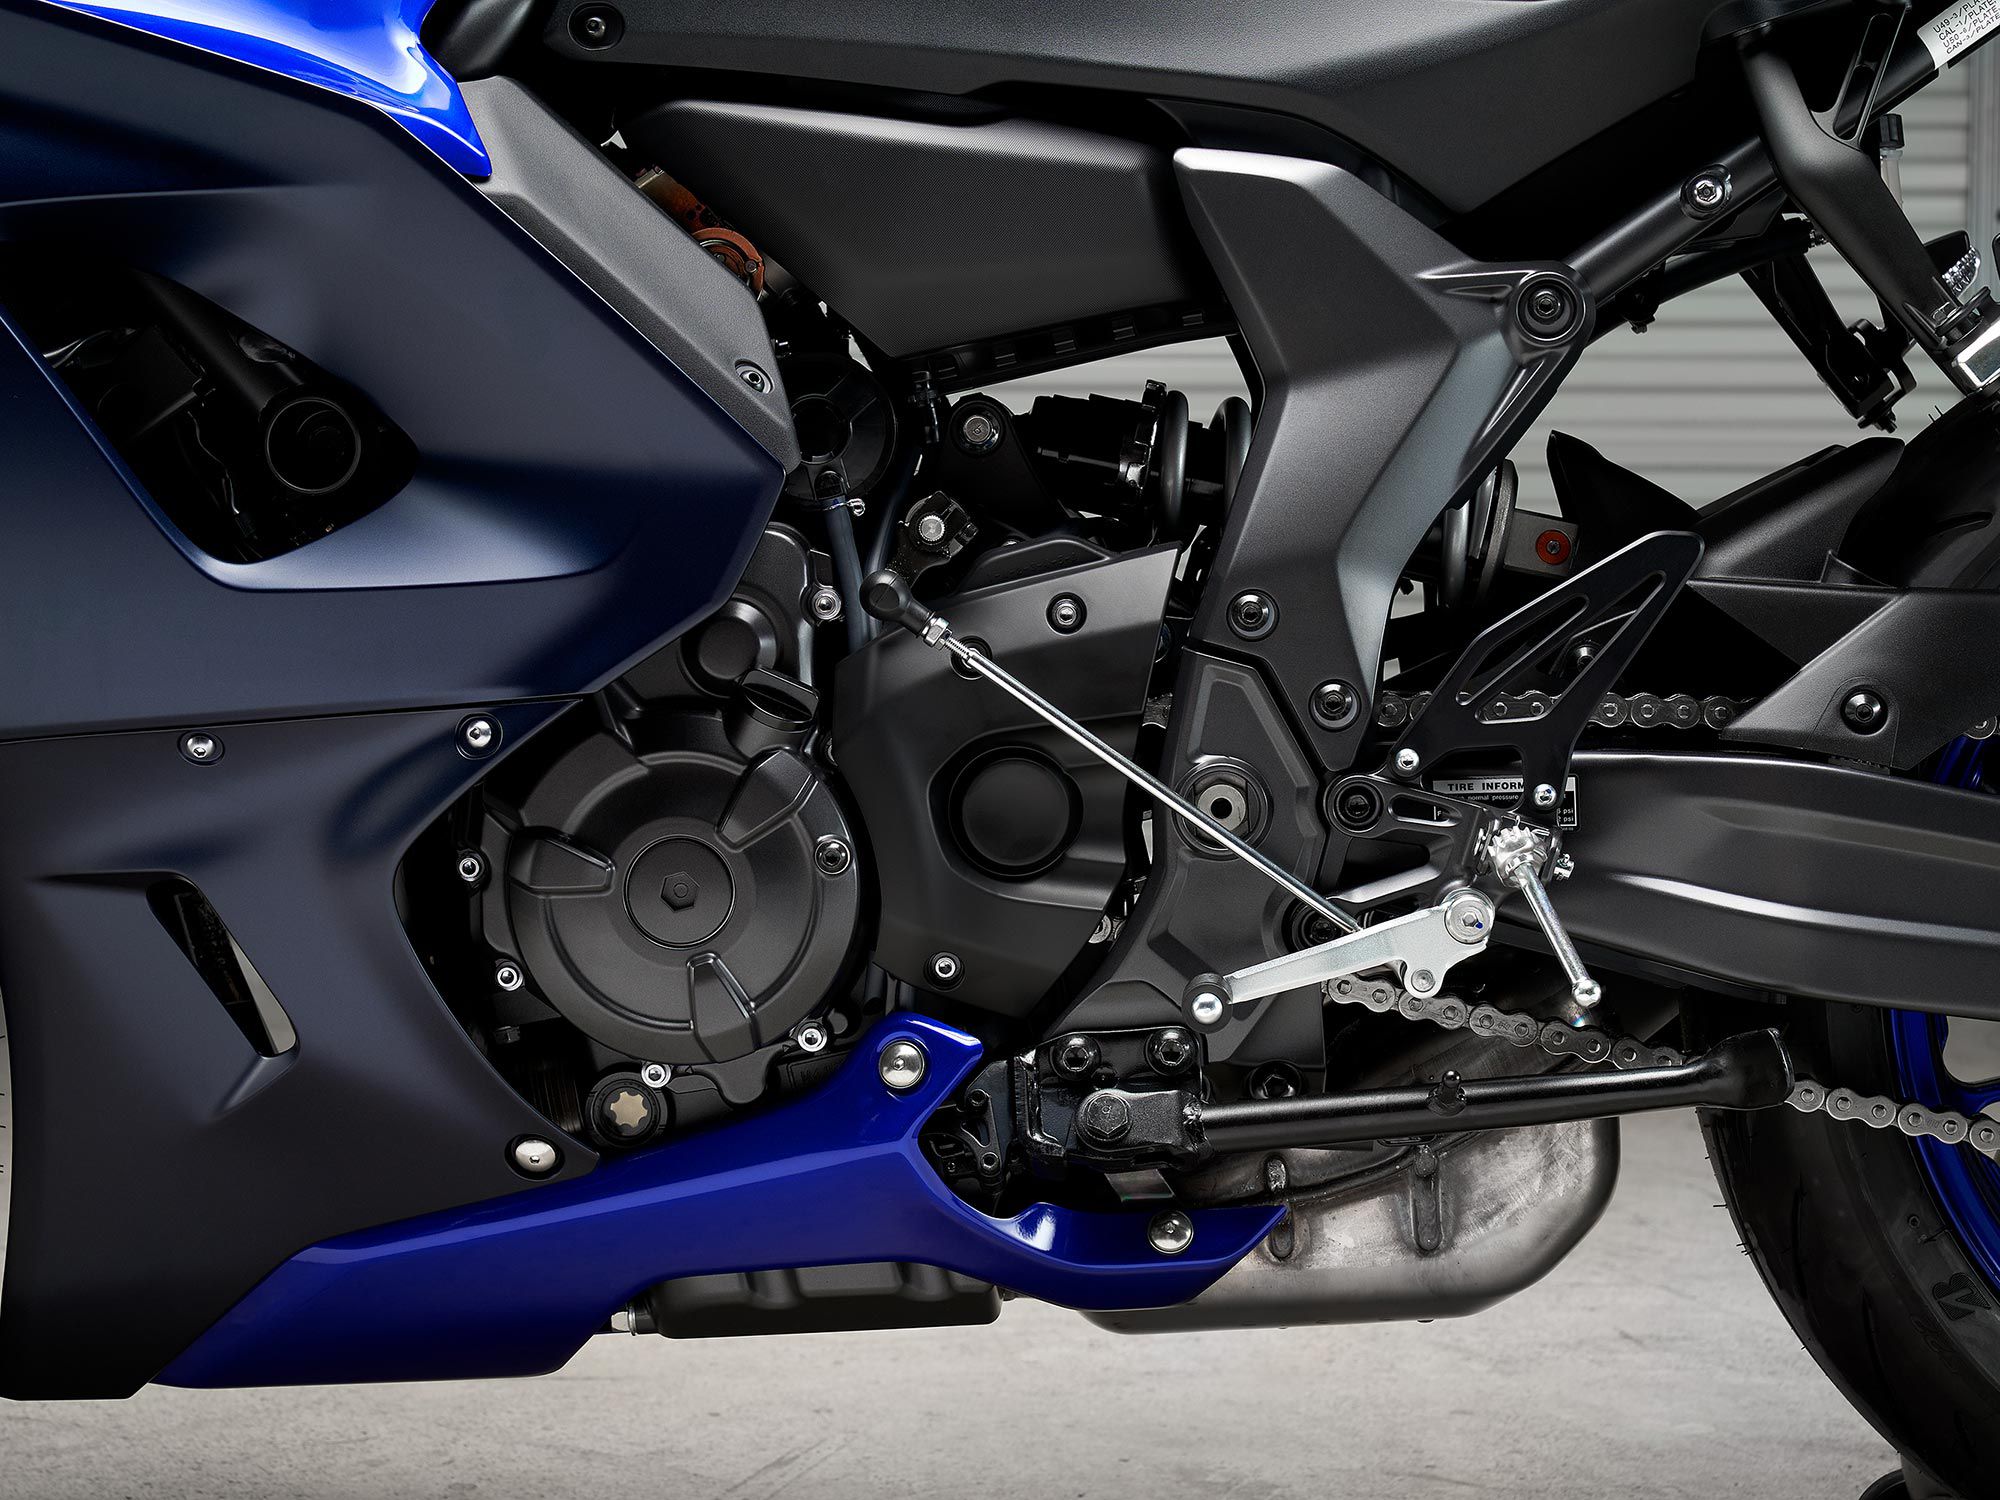 The YZF-R7 is powered by Yamaha’s tried-and-true 689cc CP2 parallel twin.